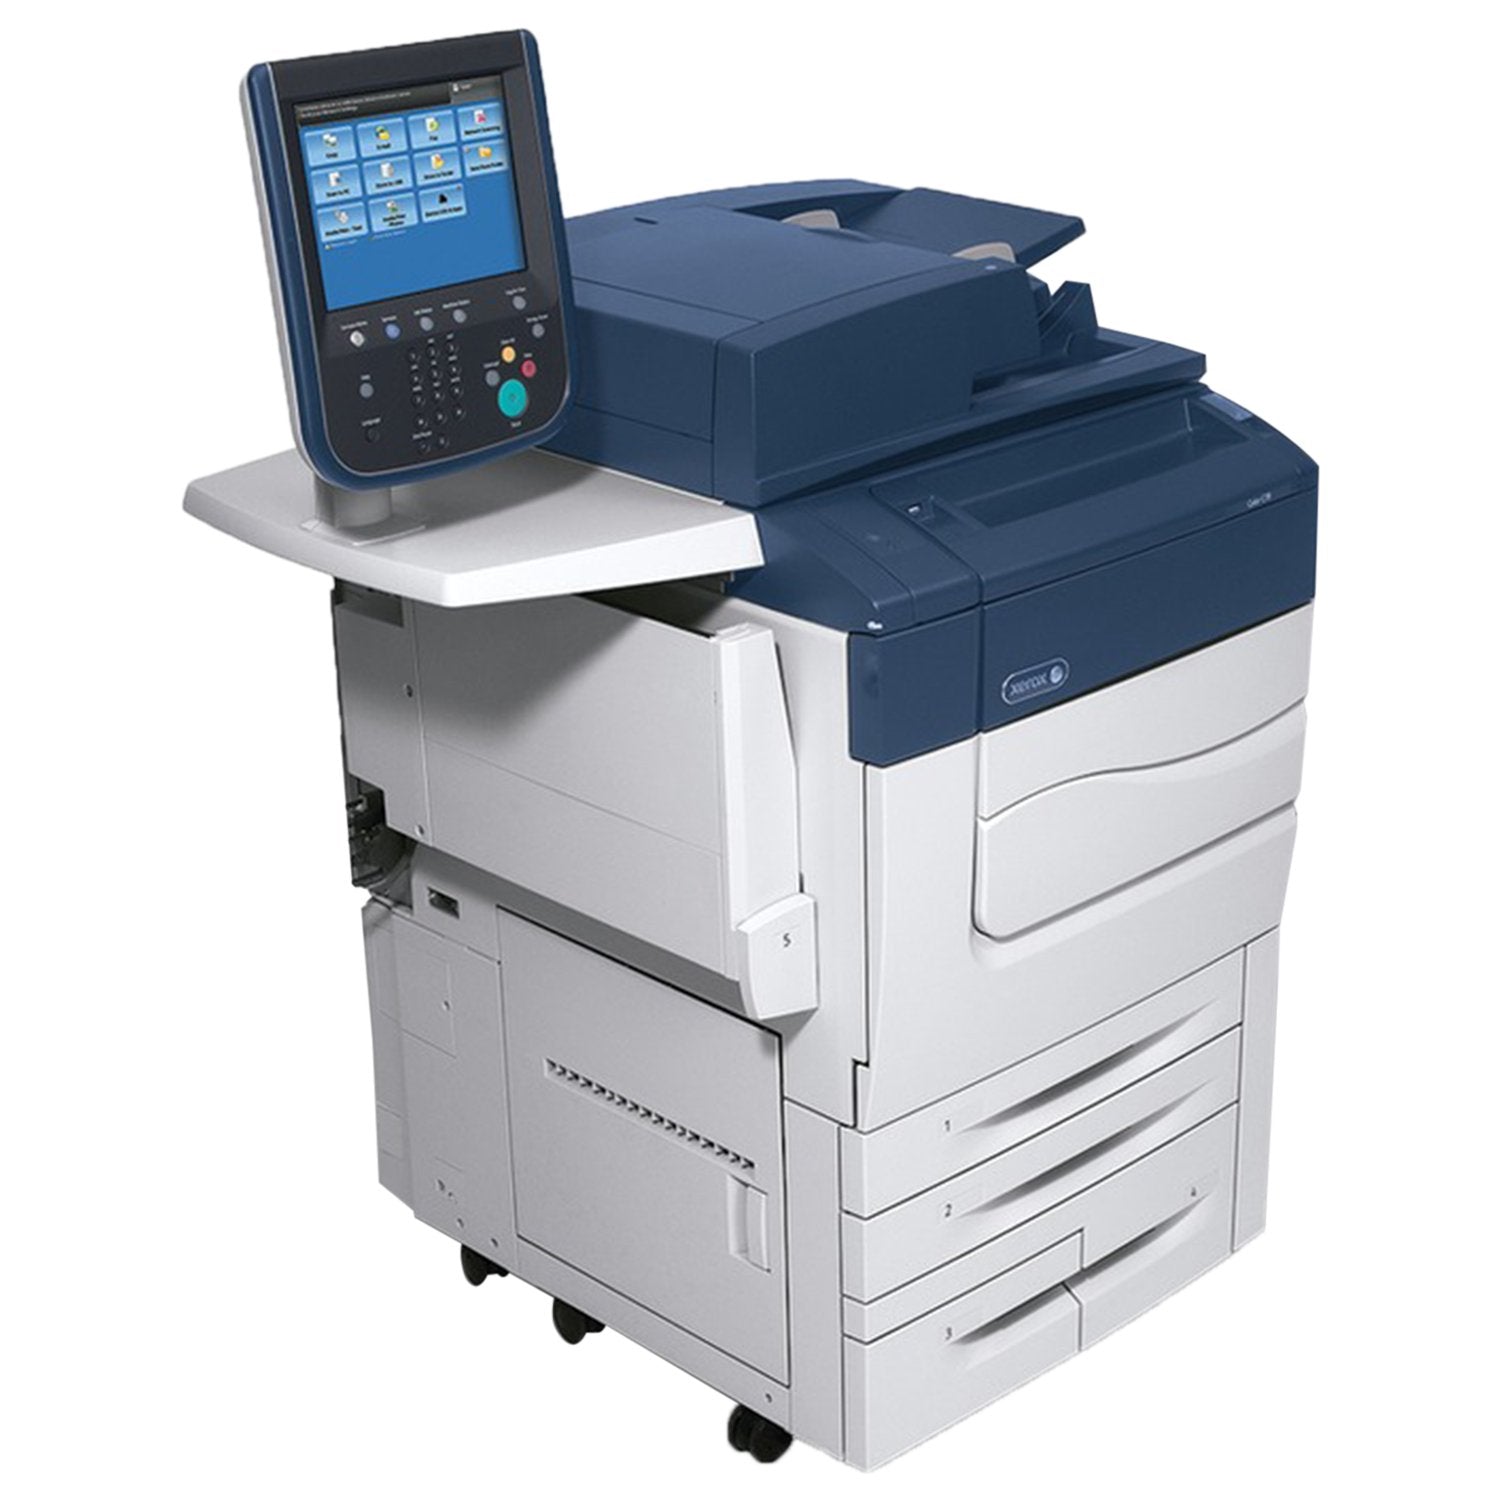 Absolute Toner $179/Month Xerox C70 Pro Office Color Multifunction Production Laser Printer | Color MFP With Support For 13 x 19.2 in. / SRA3 Printers/Copiers